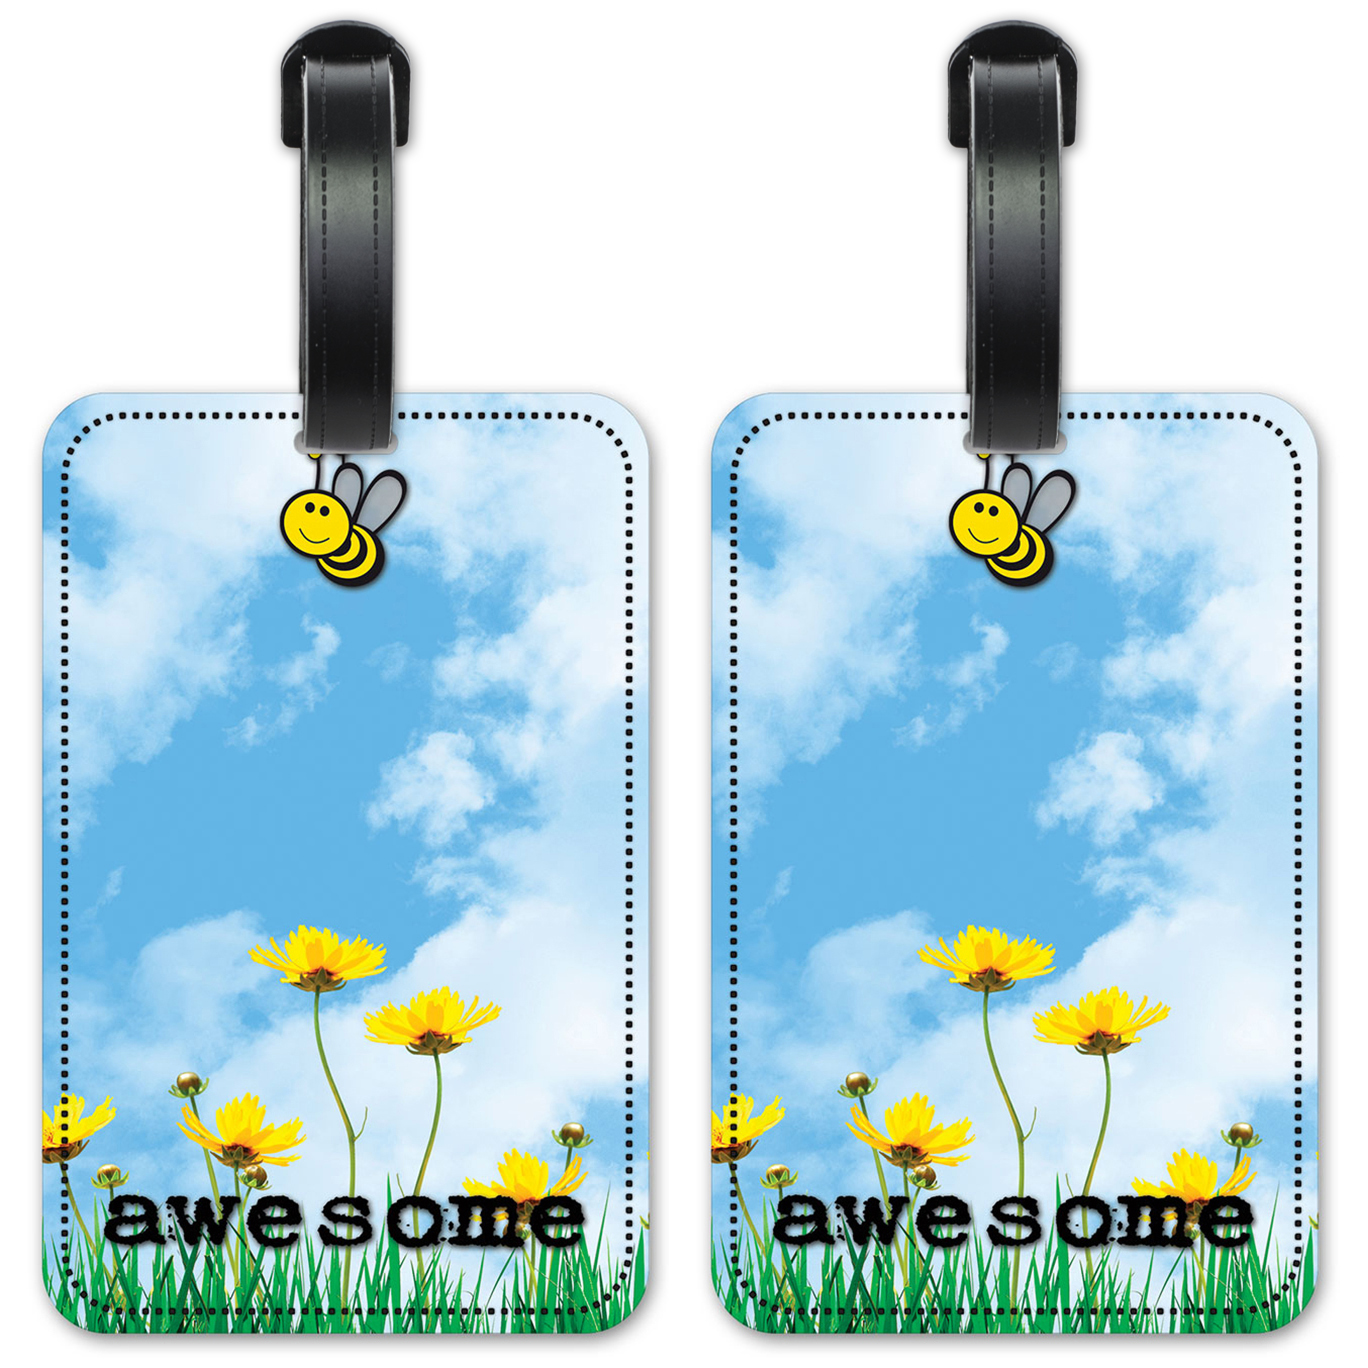 Bee Awesome - #8116